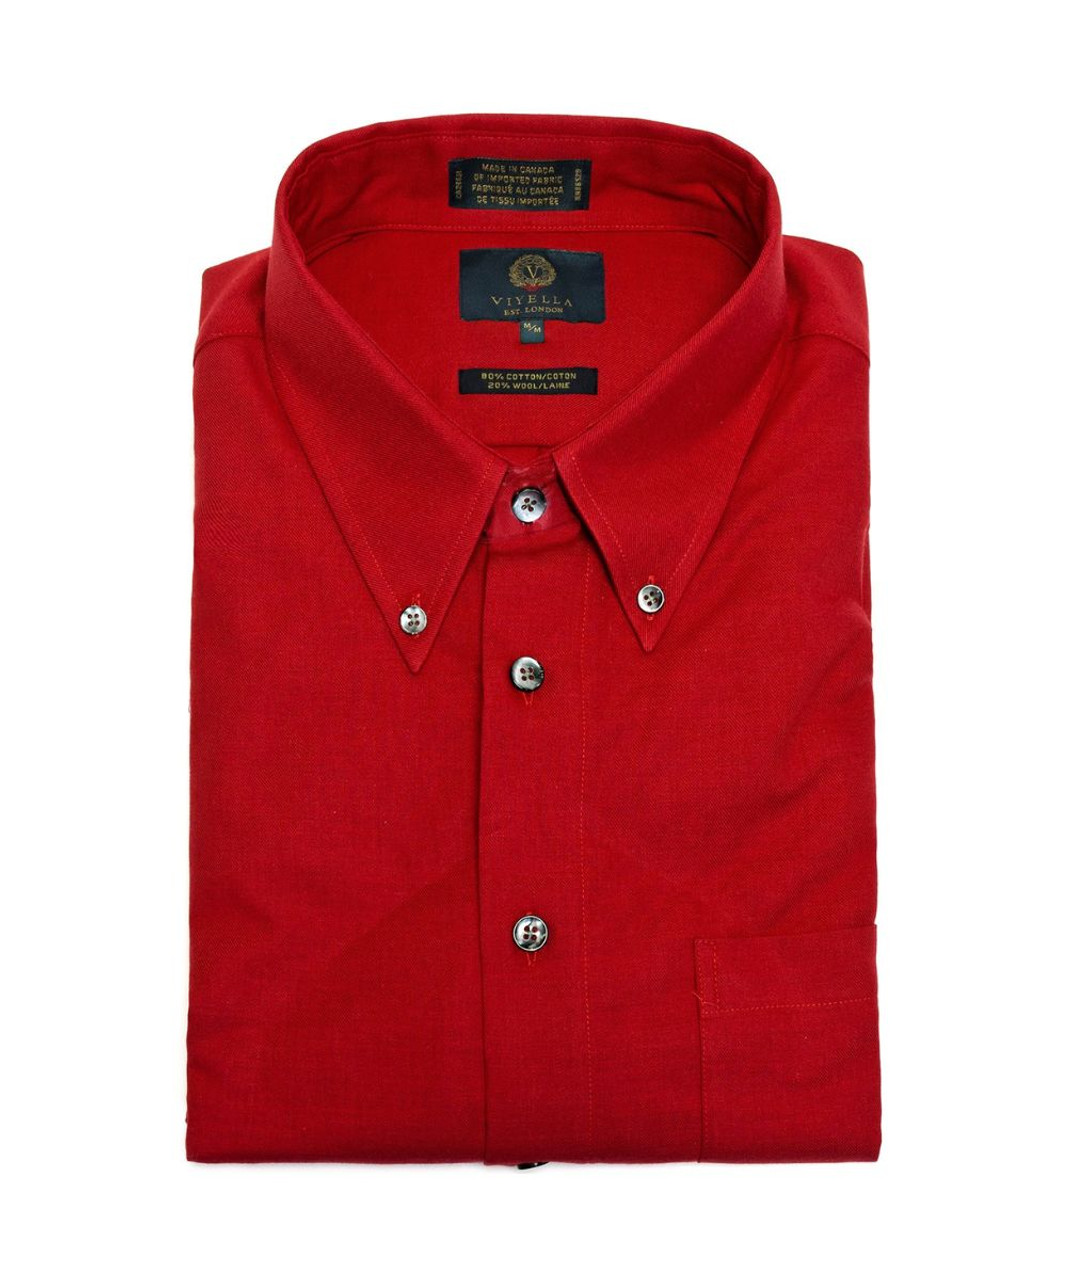 Wool and Cotton Flannel Sport Shirt: Men's Viyella Shirt Solid in Red ...